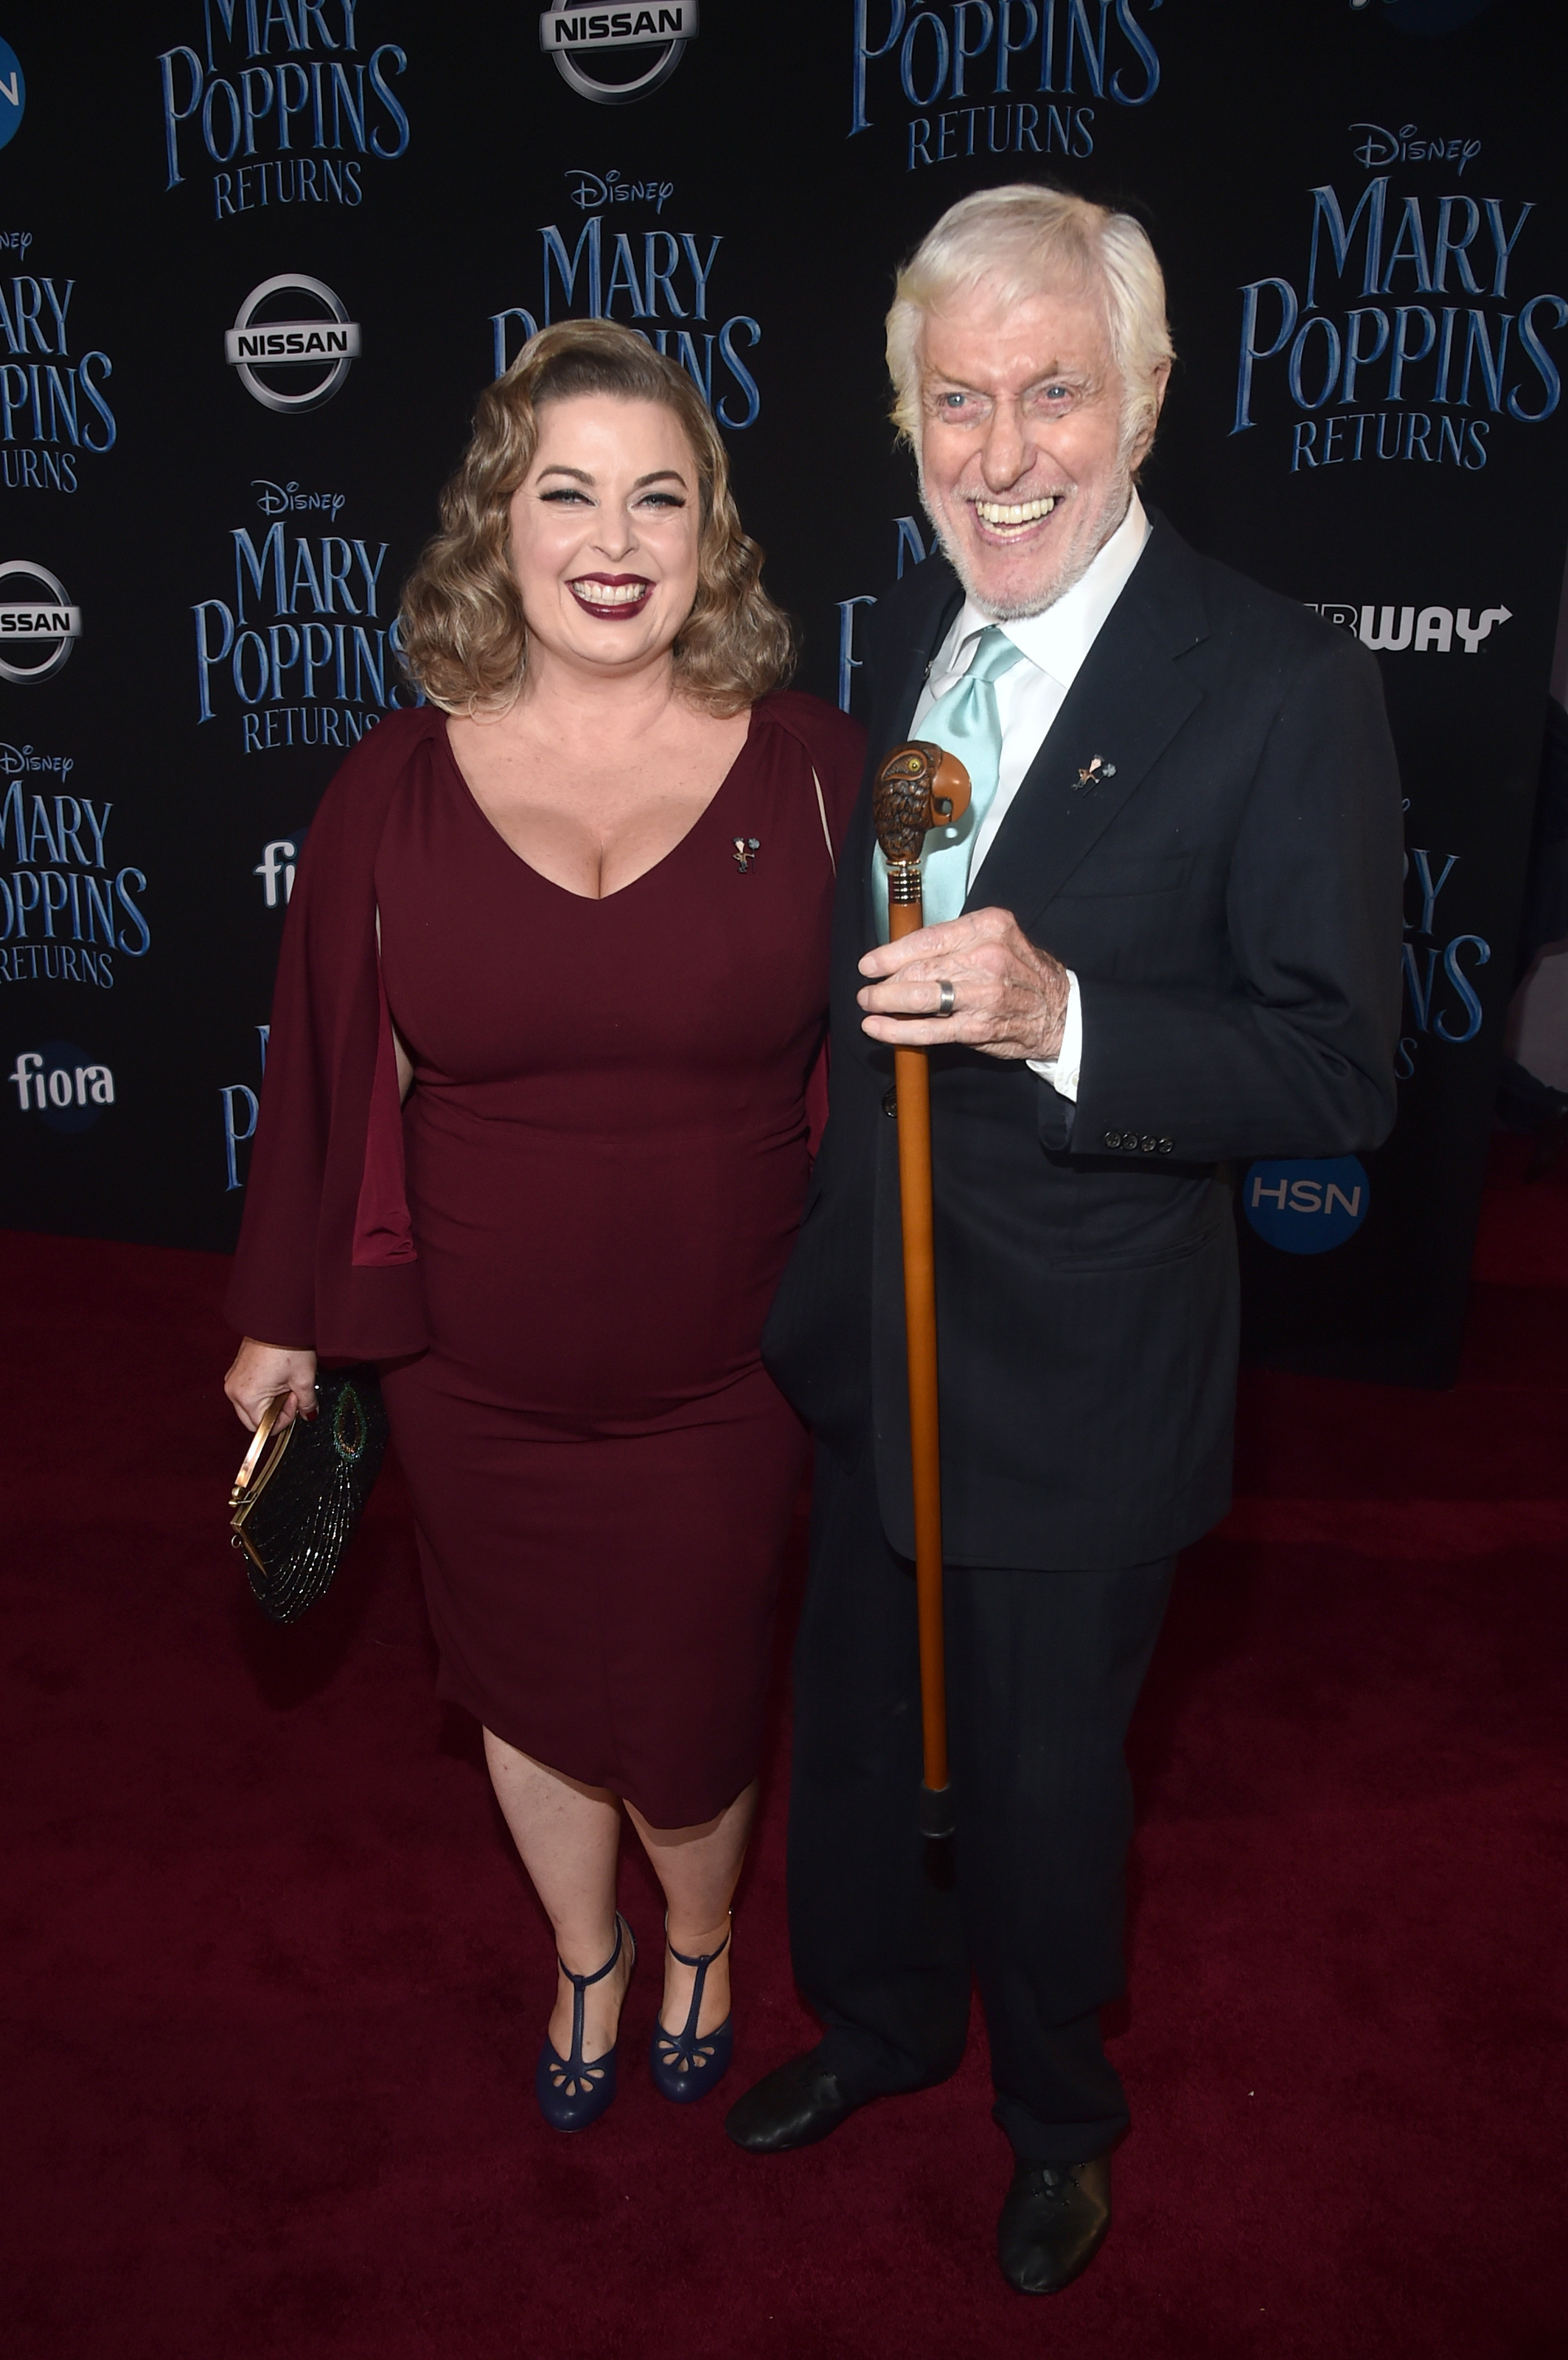 Dick Van Dyke and wife Arlene Silver the premiere of Disney's "Mary Poppins Returns" at the El Capitan Theatre on November 29, 2018 in Los Angeles, California. | Source: Getty Images